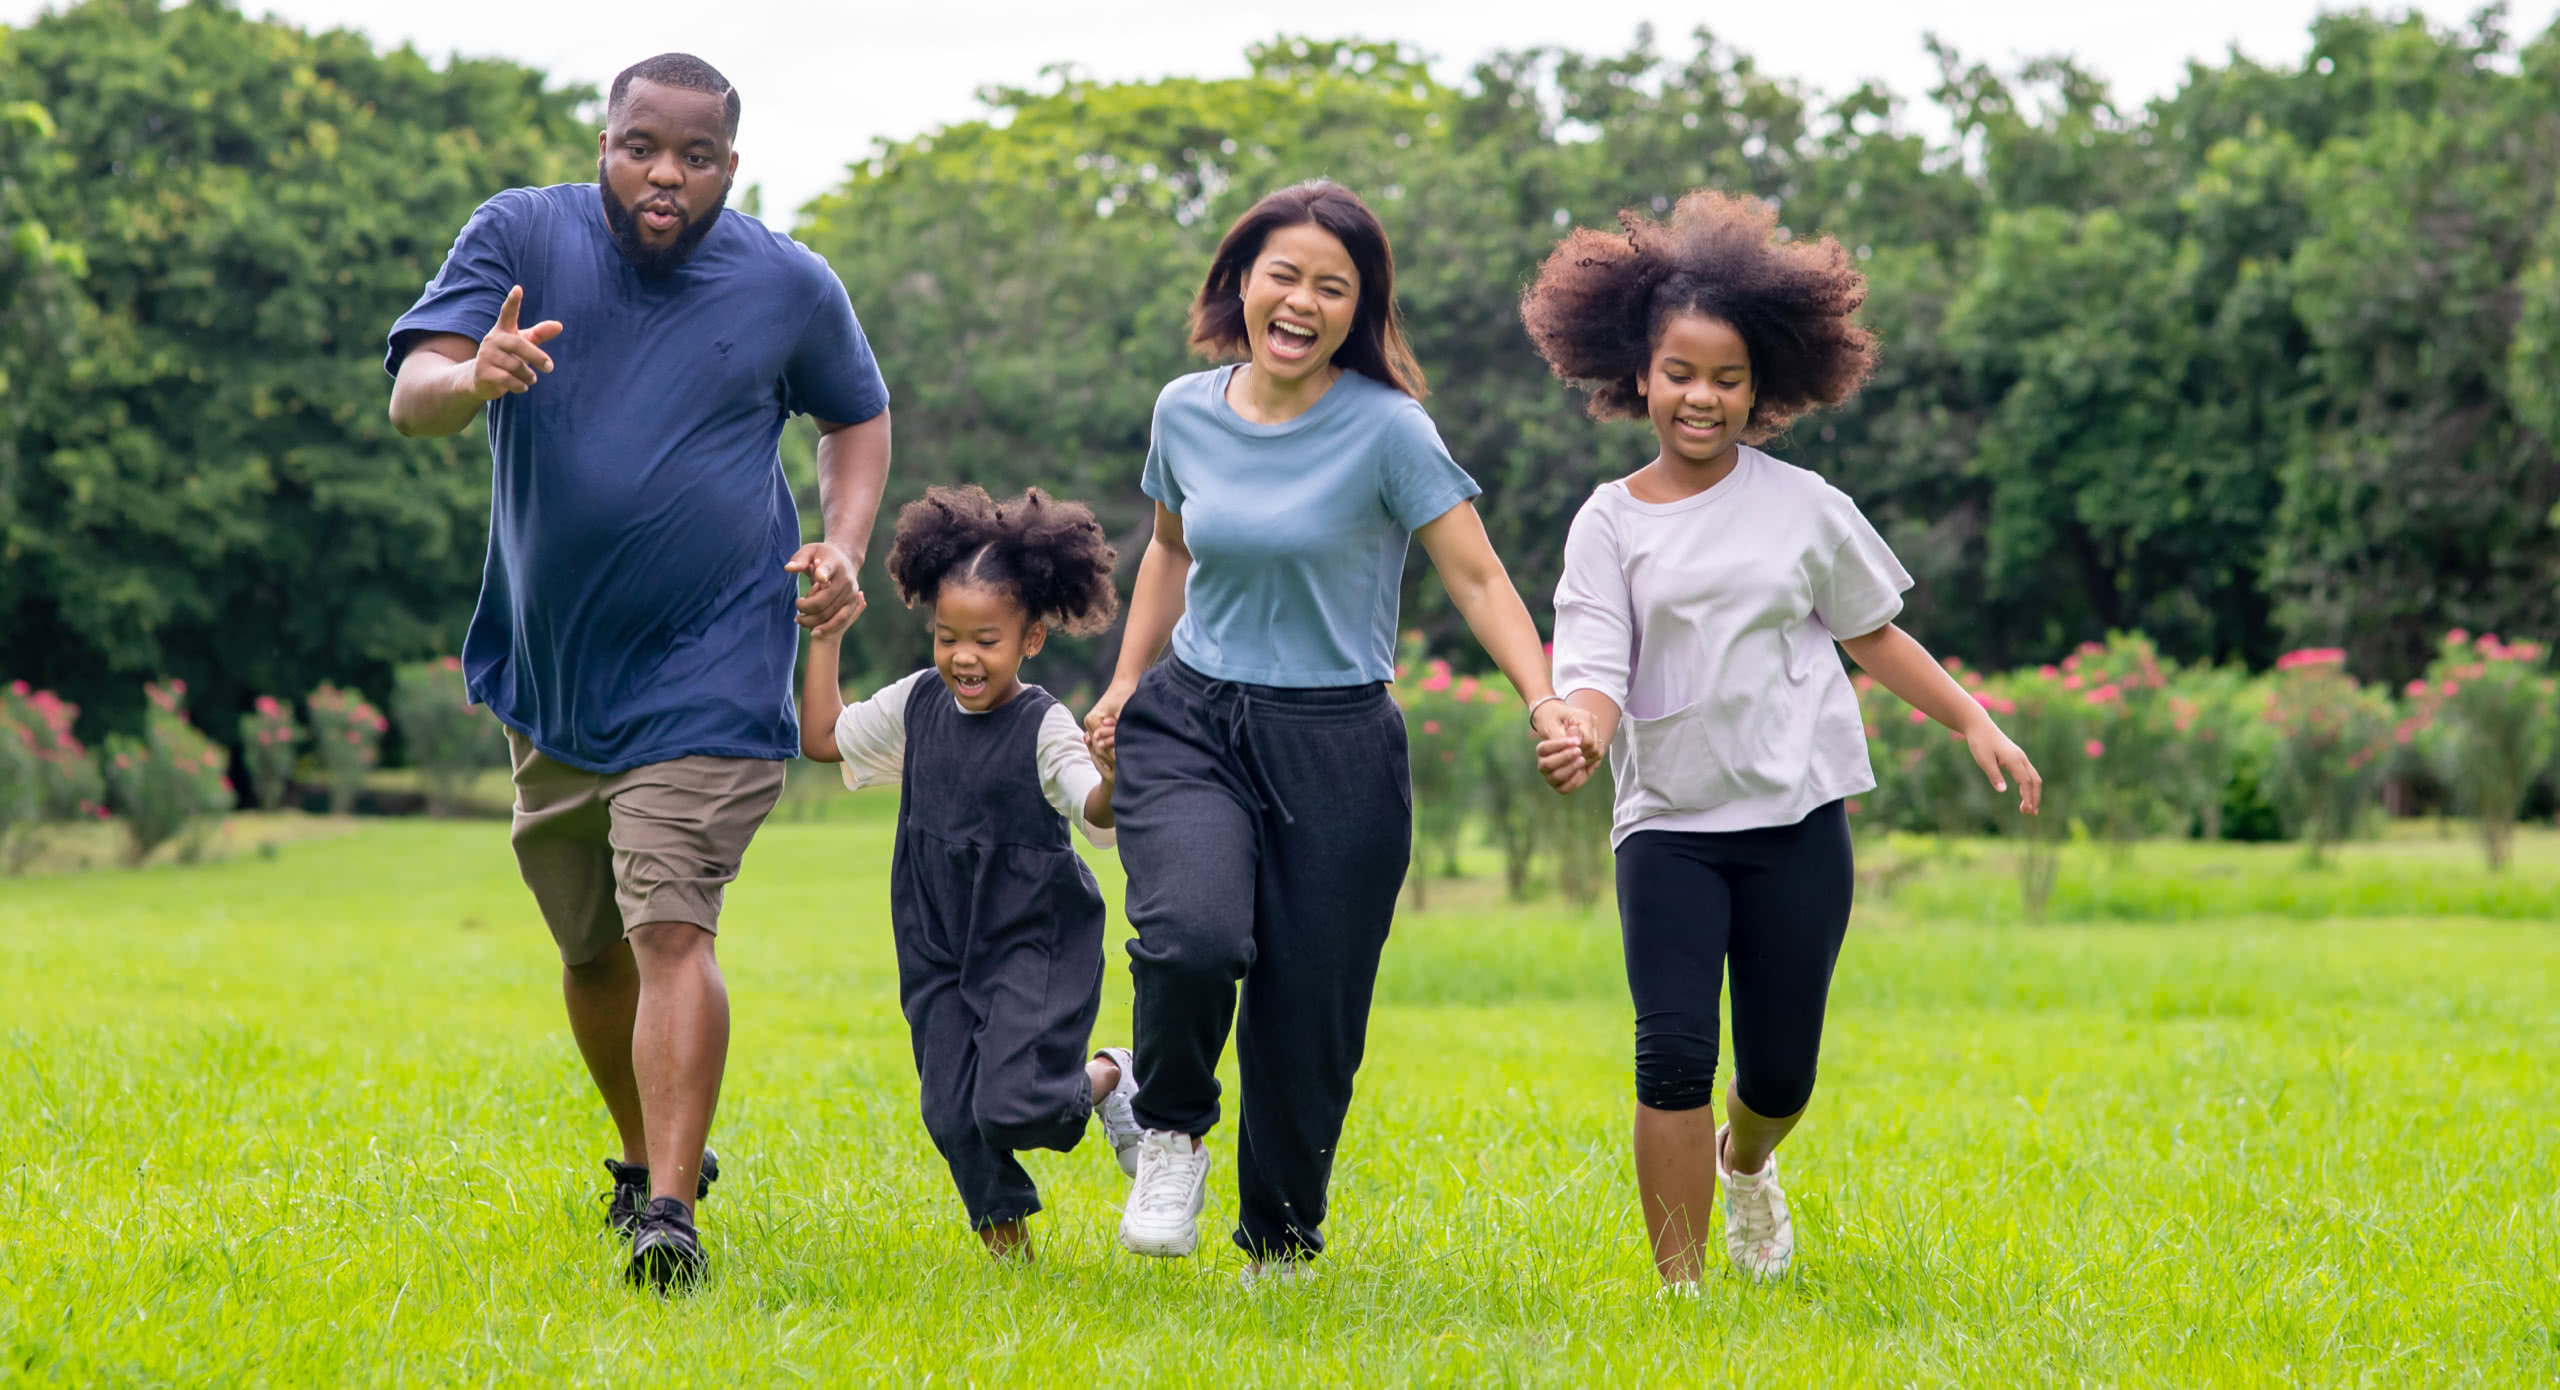 Family running together in an open field